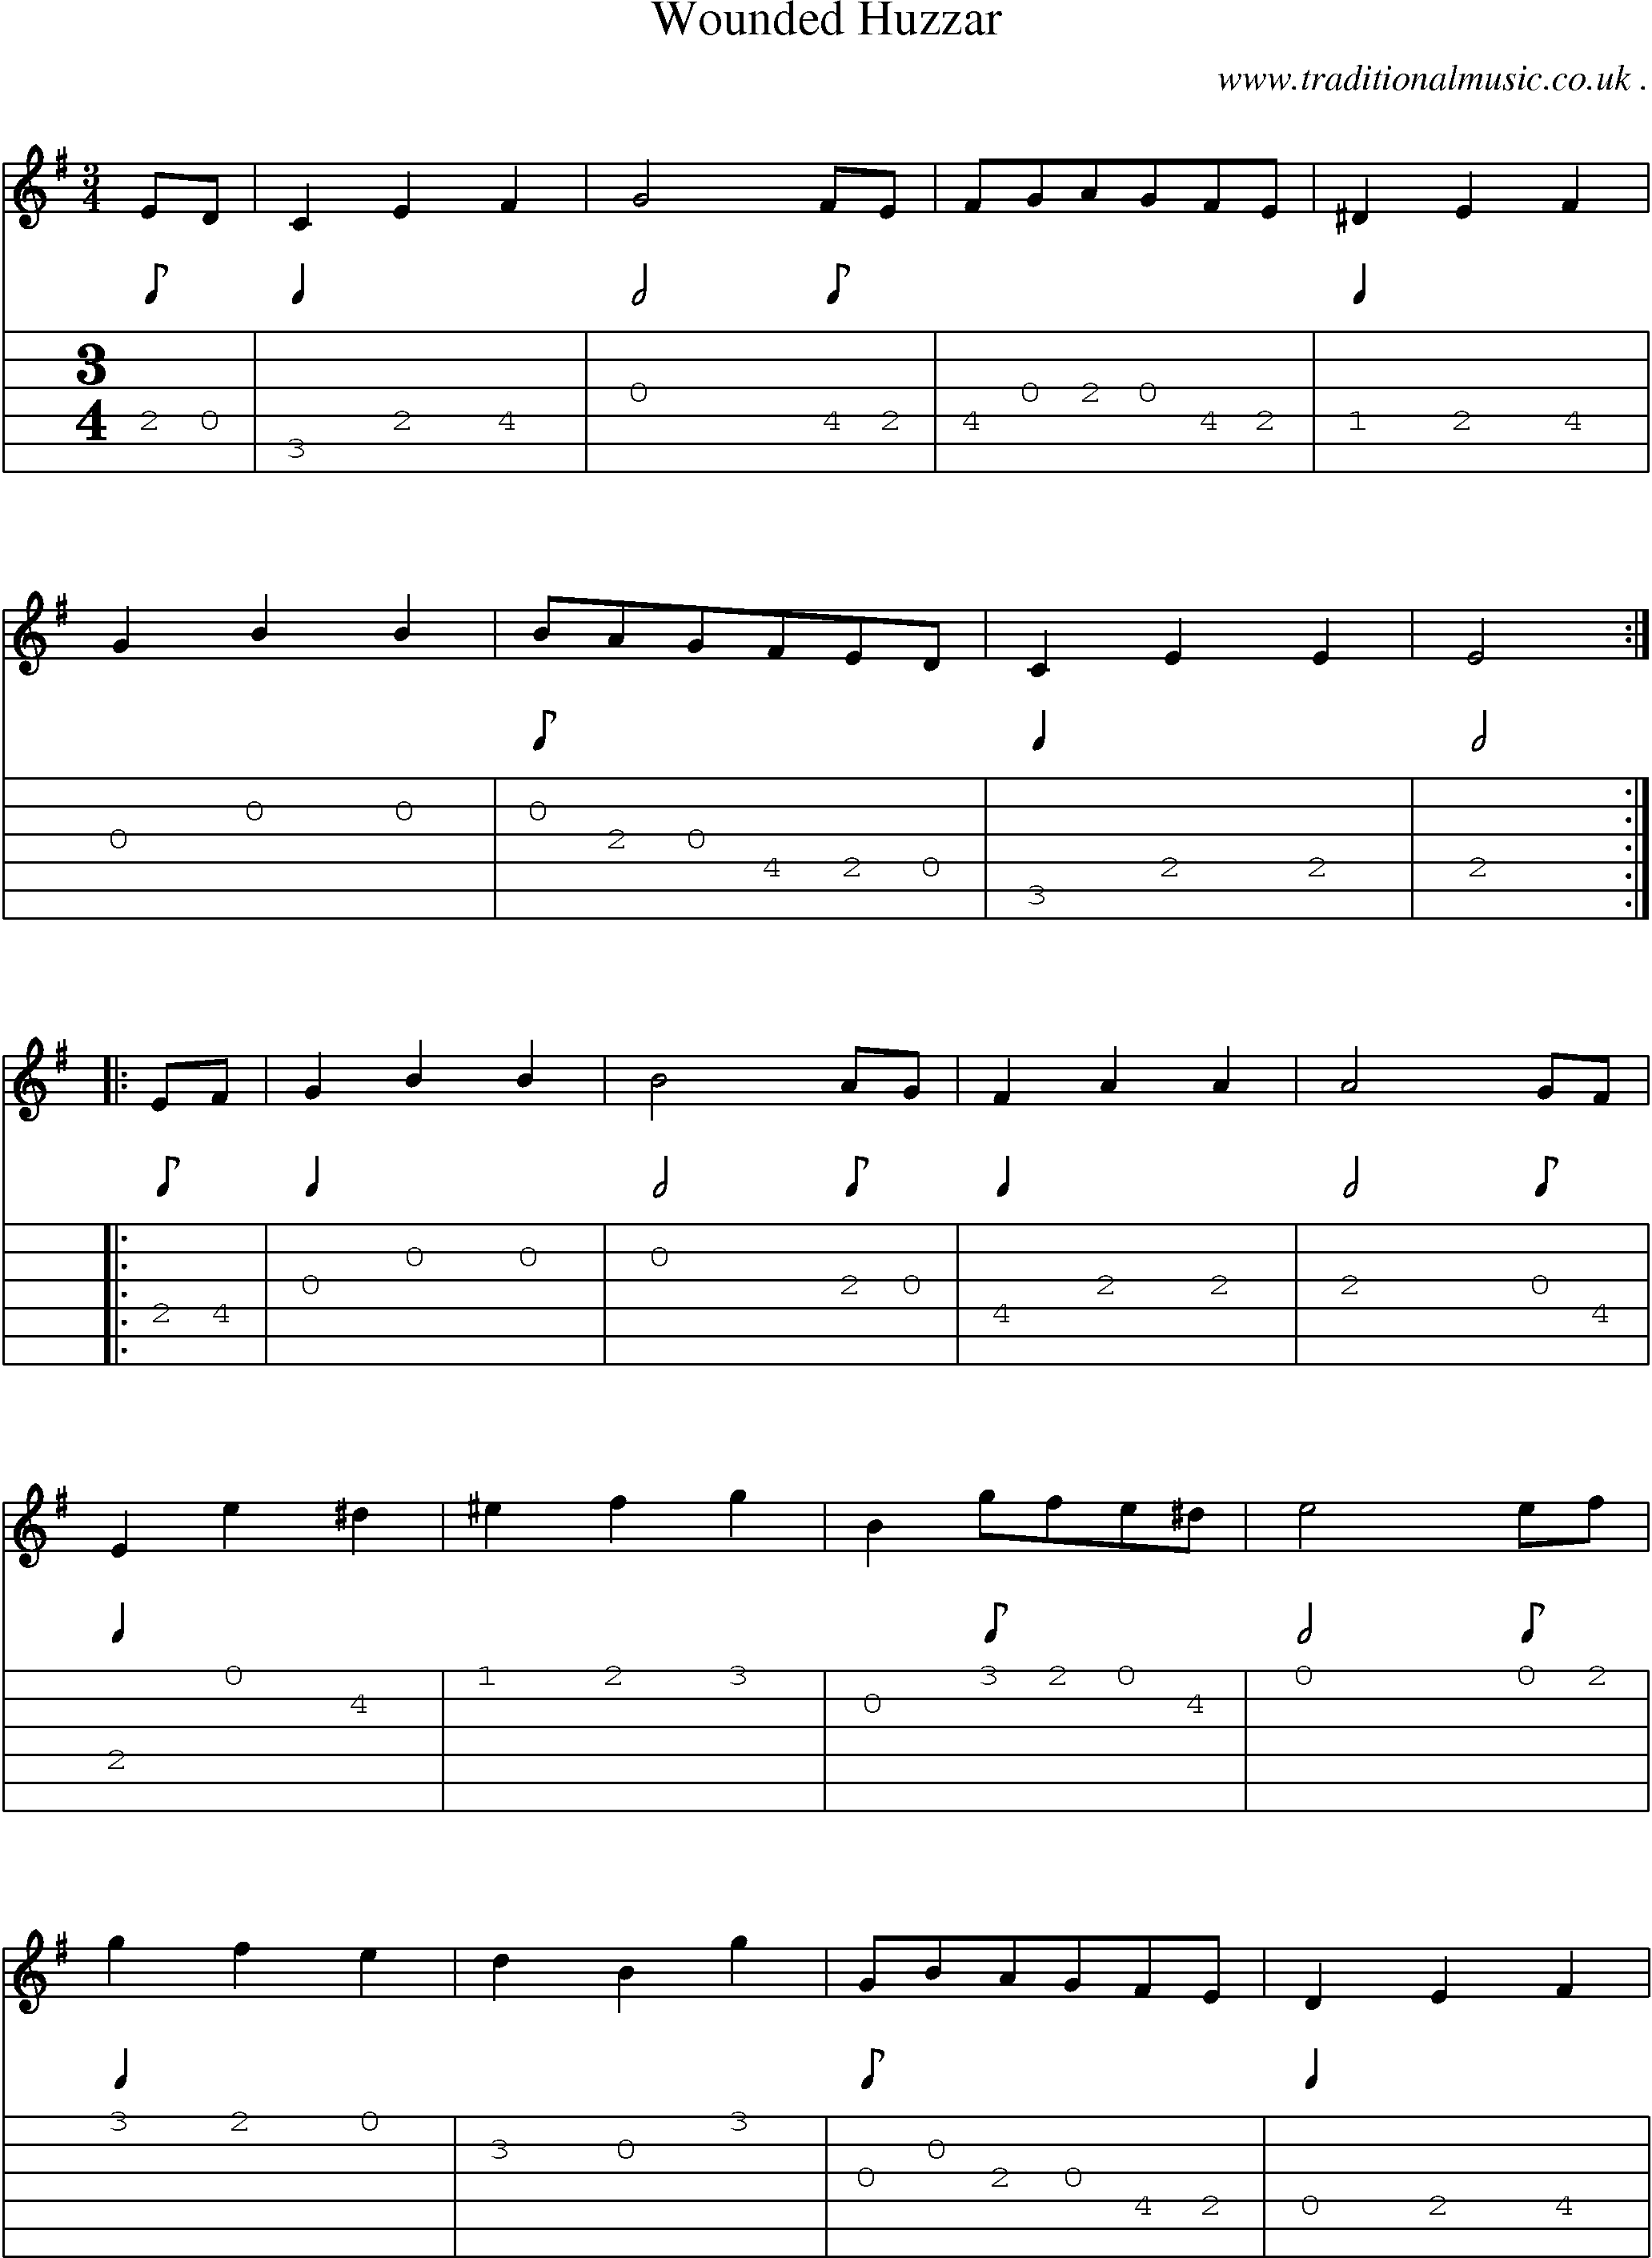 Sheet-Music and Guitar Tabs for Wounded Huzzar